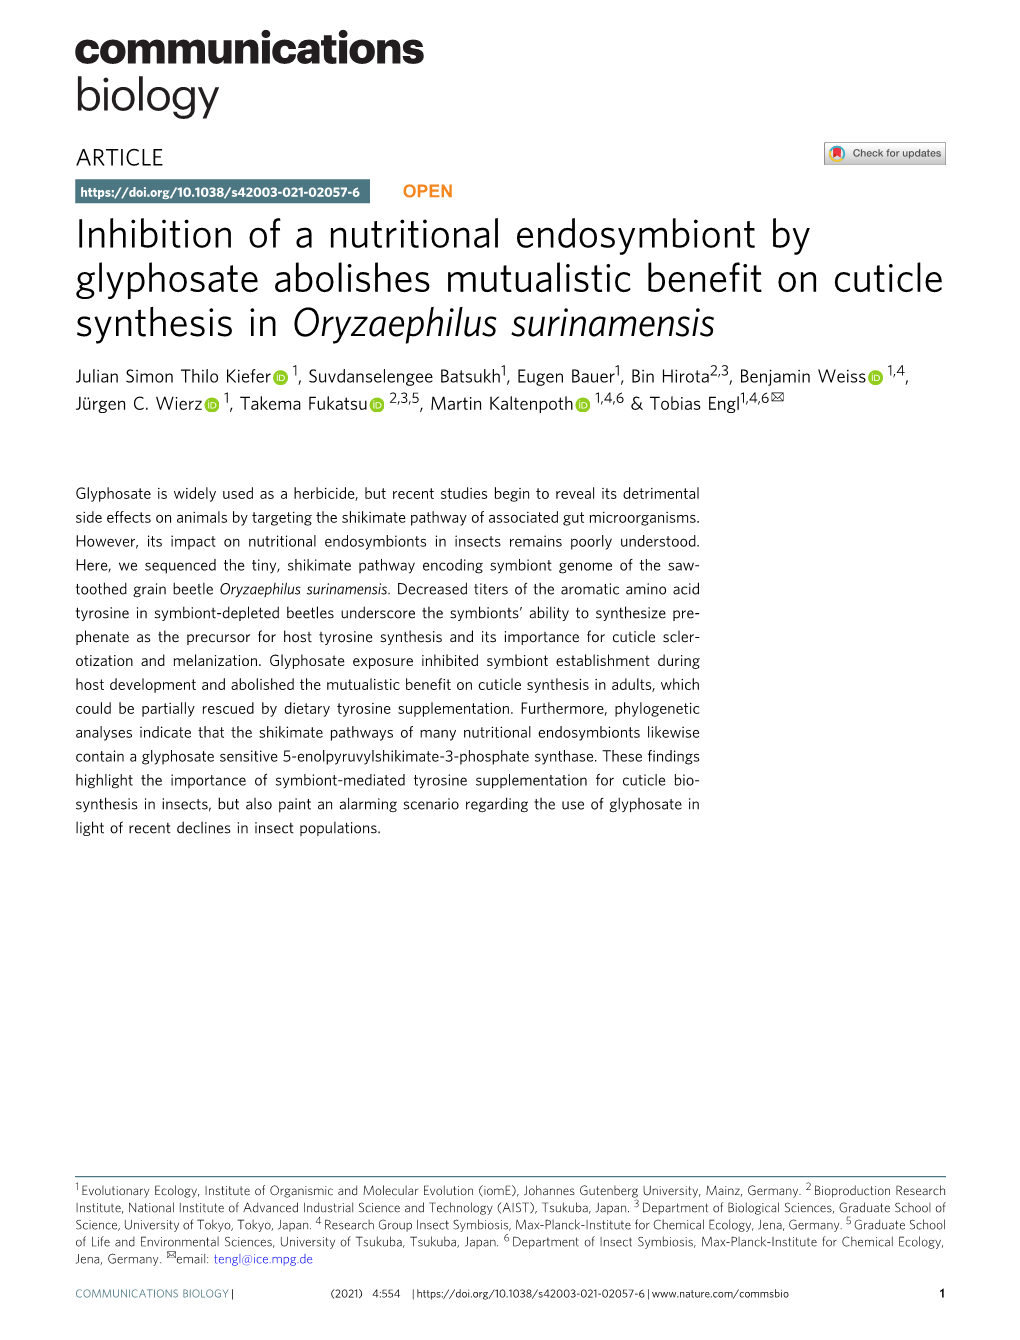 Inhibition of a Nutritional Endosymbiont by Glyphosate Abolishes Mutualistic Benefit on Cuticle Synthesis in Oryzaephilus Surina